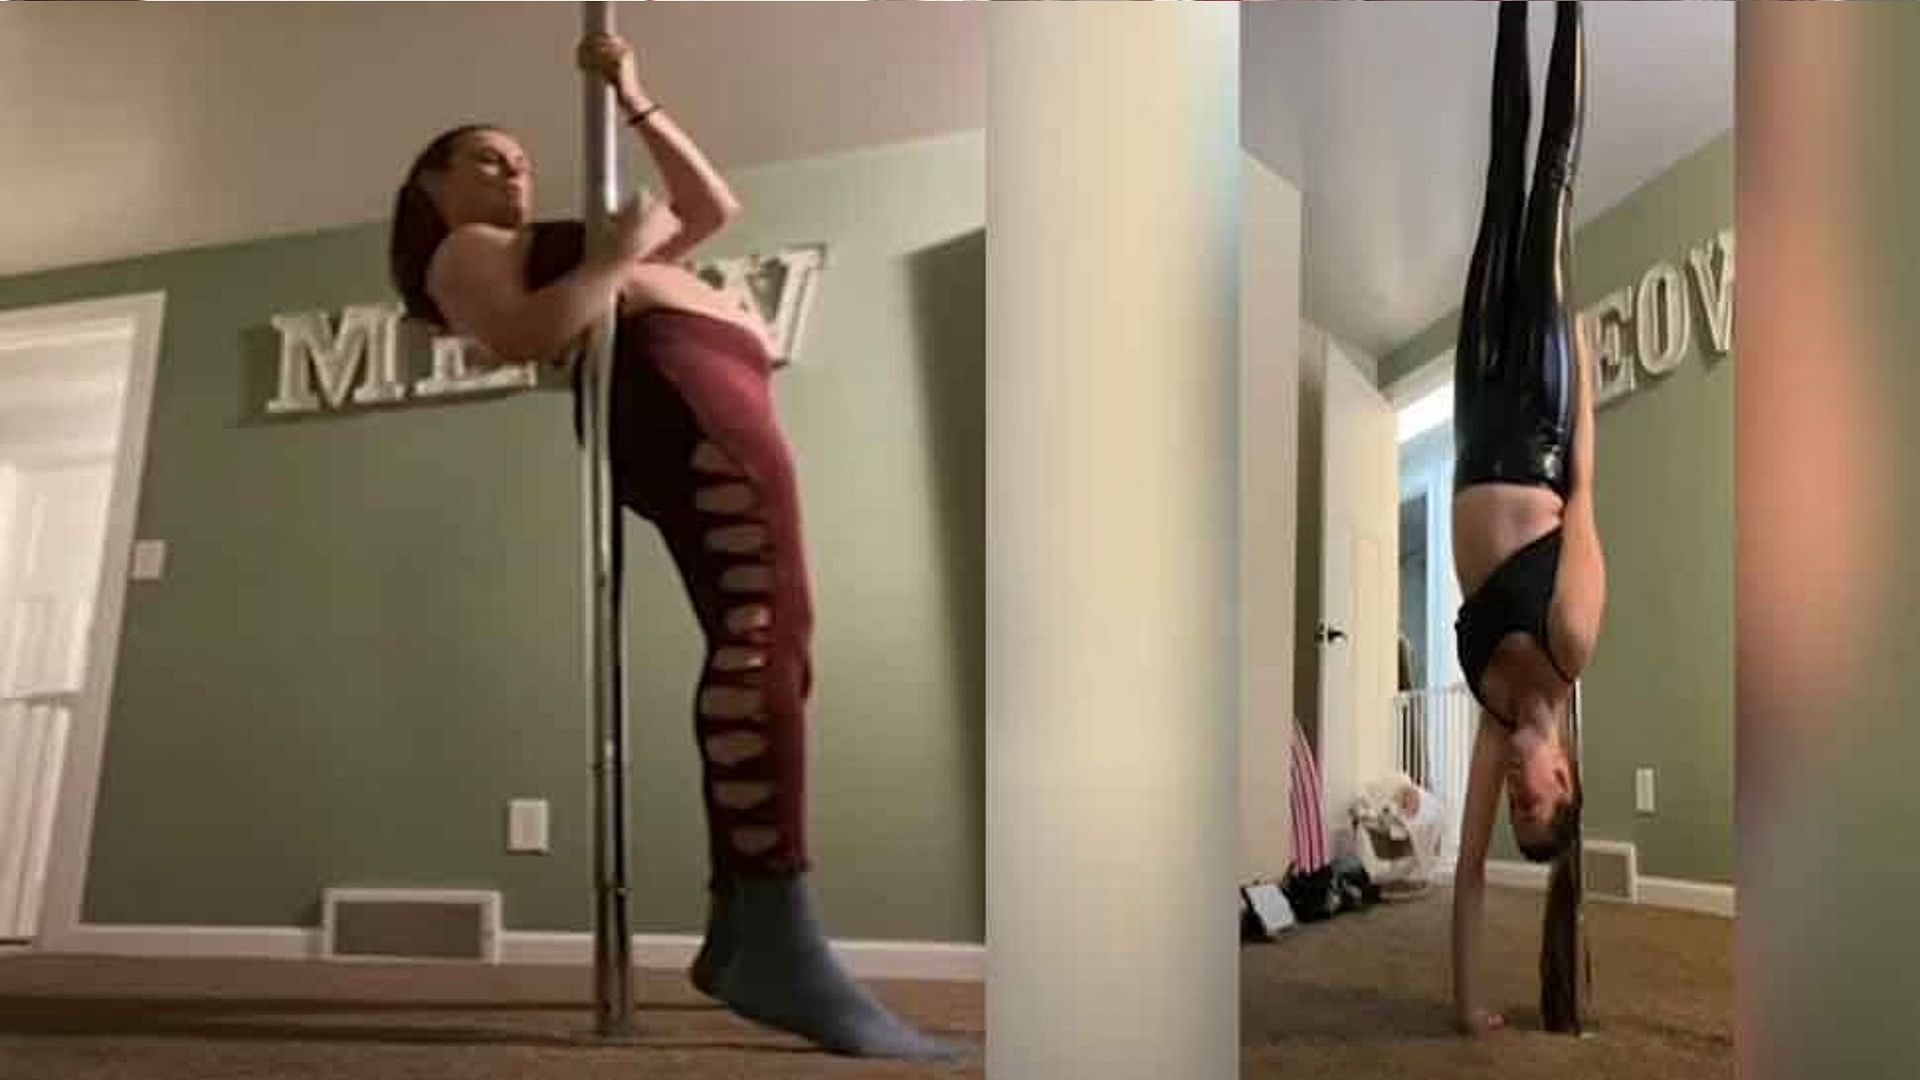 Pole Dance Video: Few hours before delivery the woman did pole dance